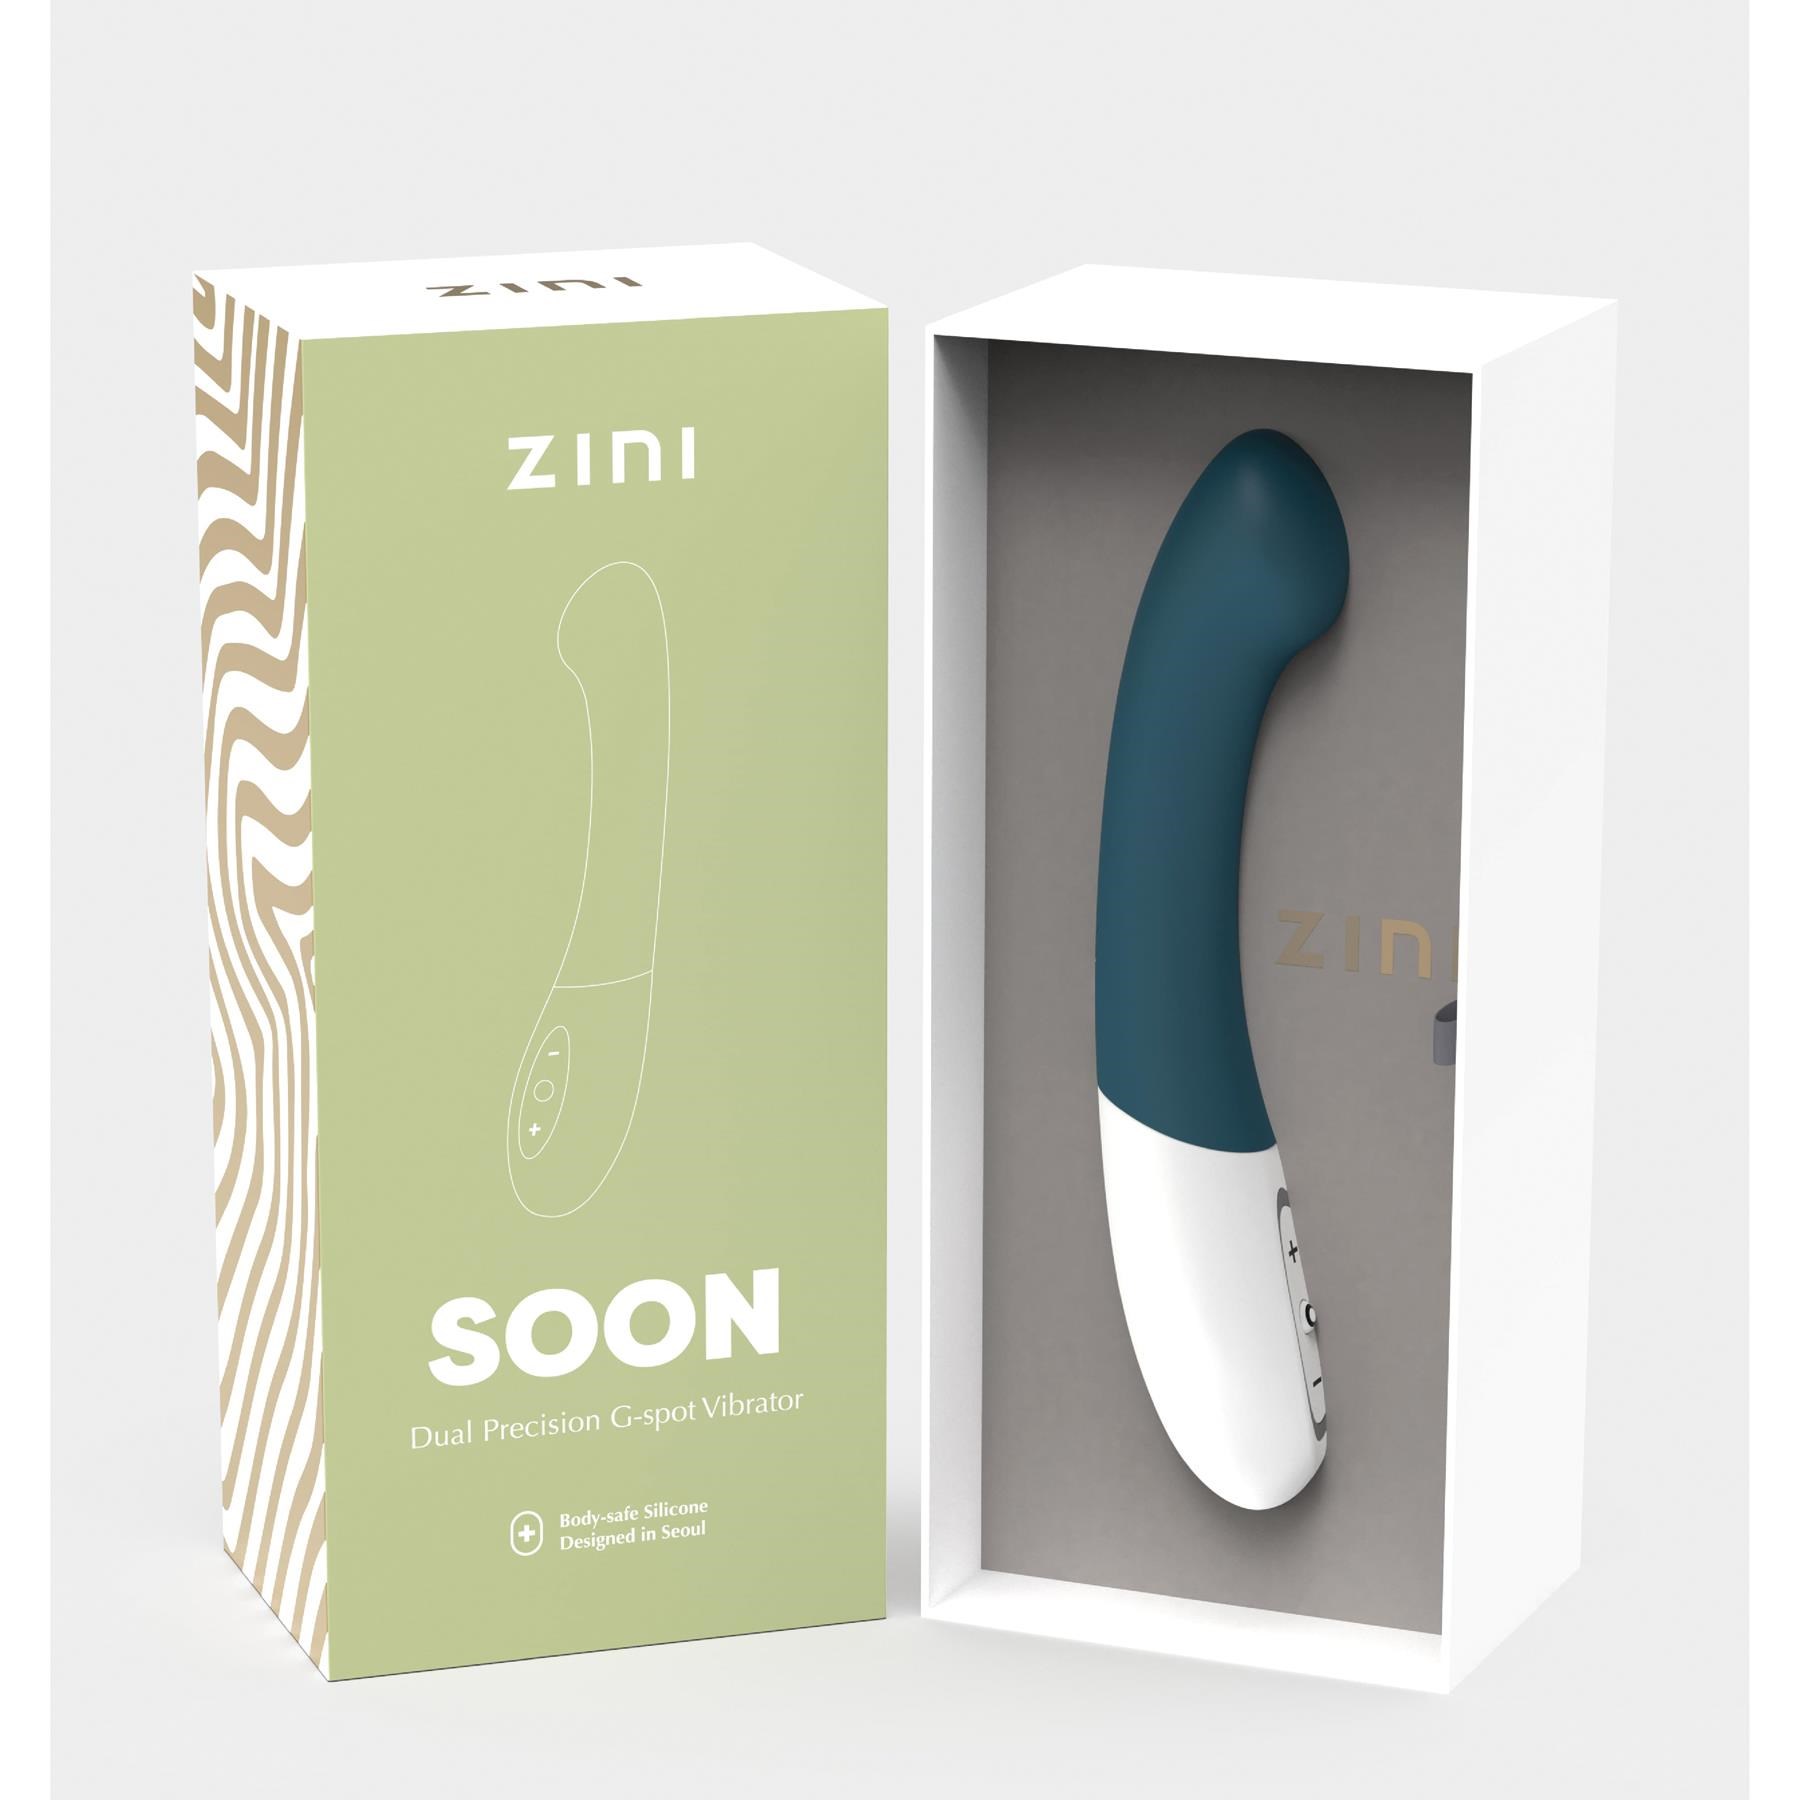 Zini Soon G-Spot Massager -  - Open Packaging - Showing Product